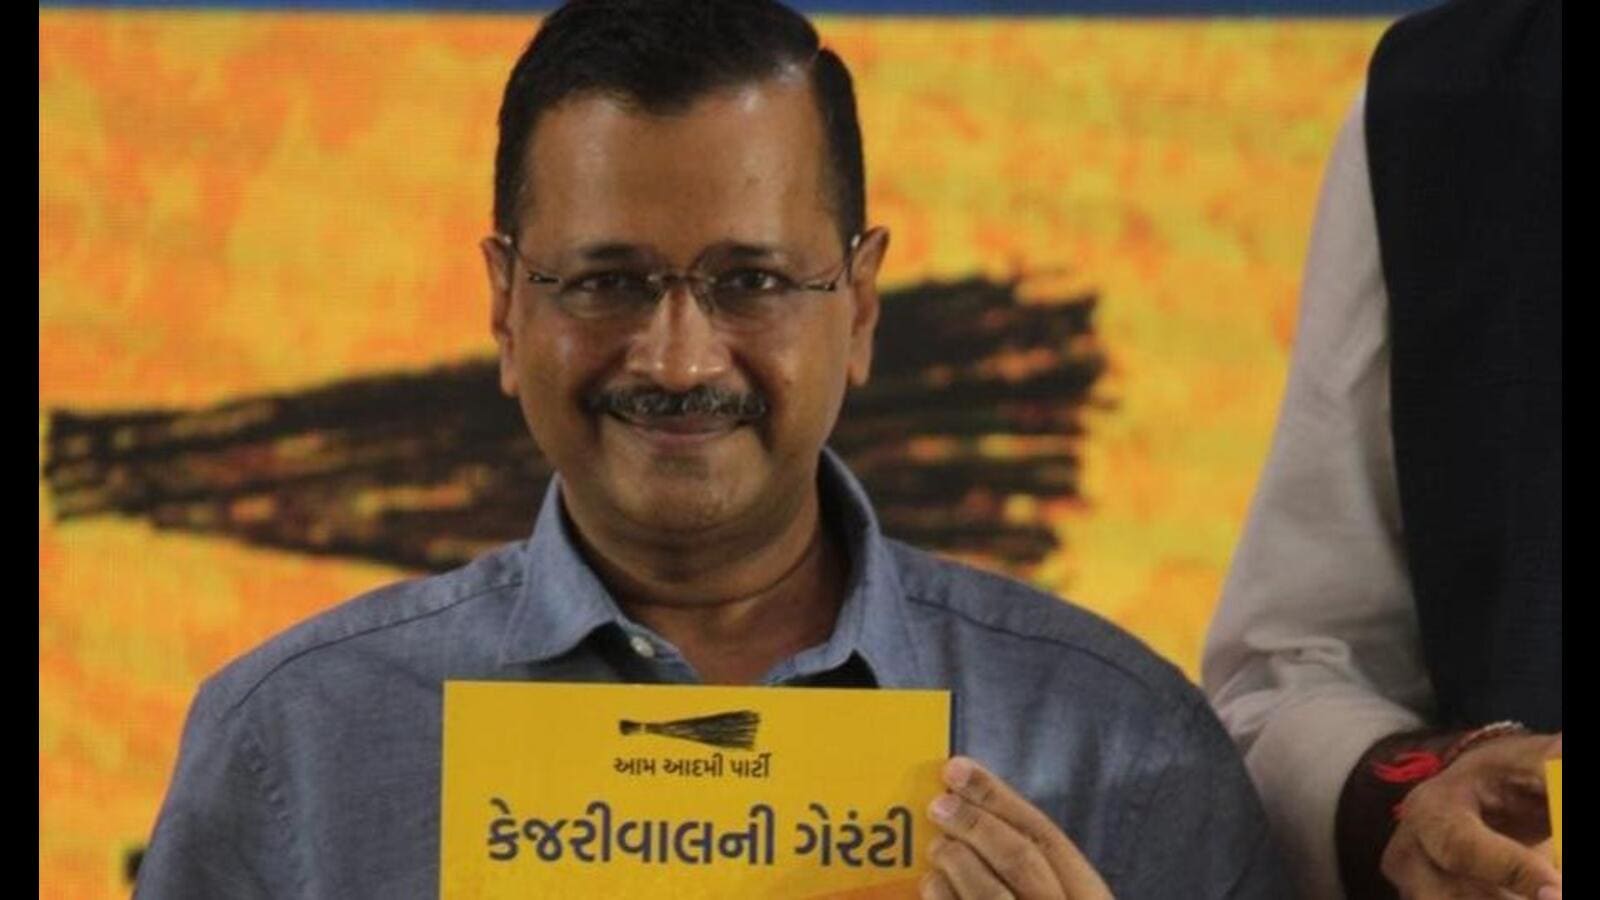 300 units free electricity per month if AAP comes to power in Gujarat:  Kejriwal | Latest News India